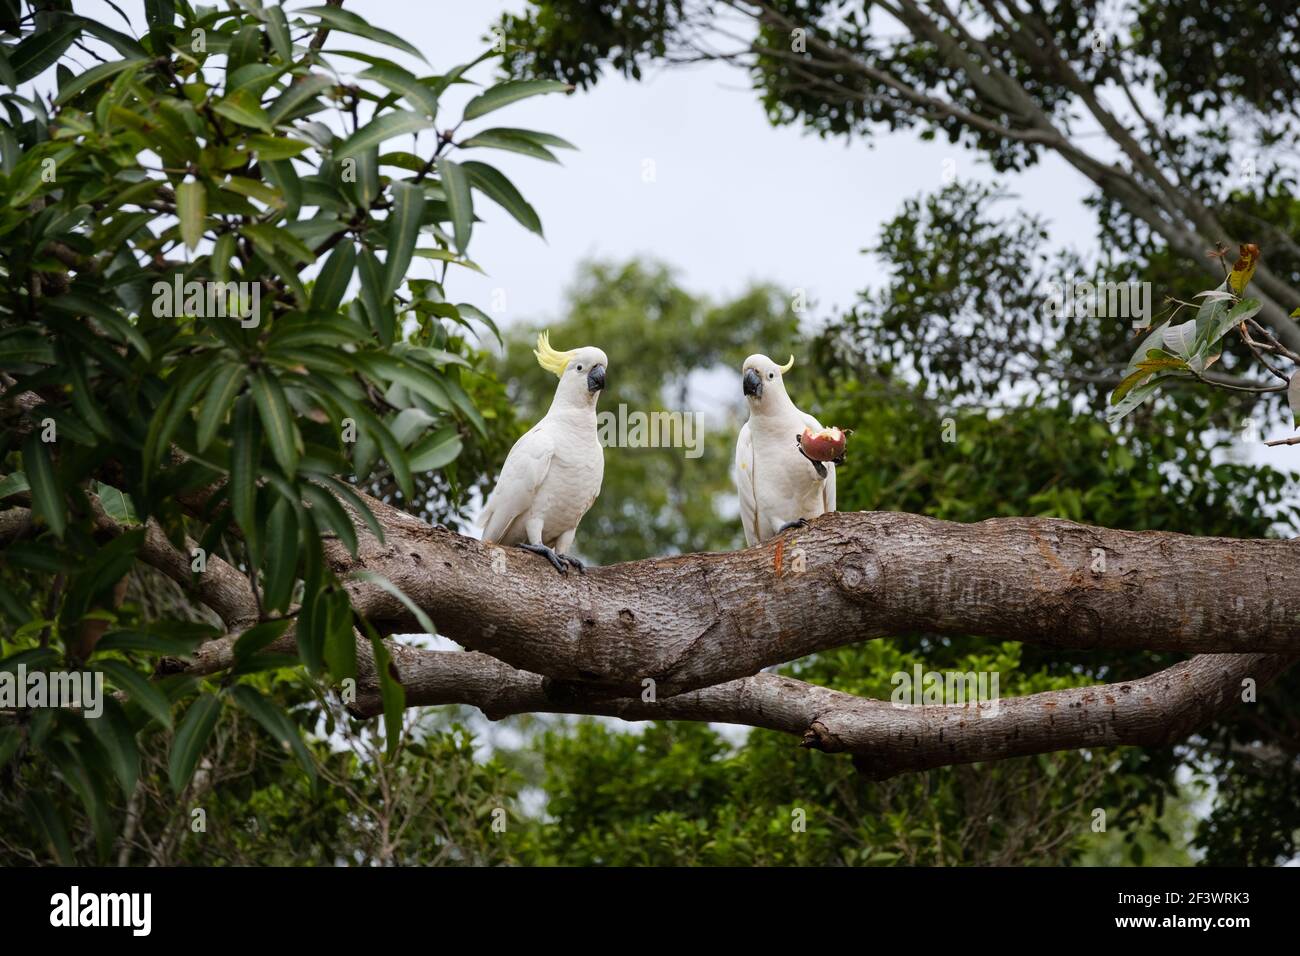 Two Sulphur-crested cockatoos in Australia facing the camera after eating a whole passionfruit, held in its claws. Stock Photo